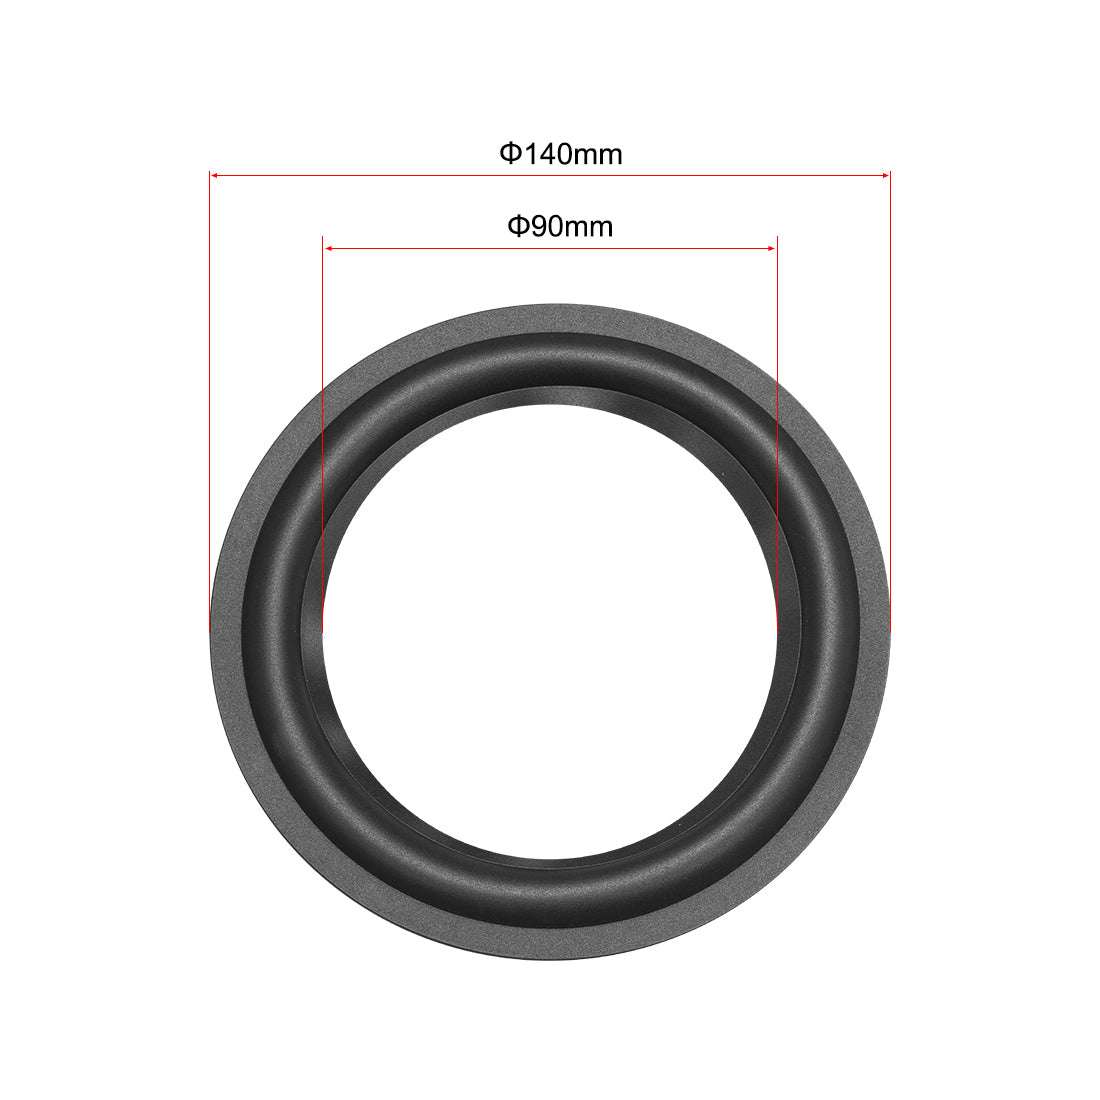 uxcell Uxcell 5.5" 5.5 Inch Speaker Rubber Edge Surround Rings Replacement Part for Speaker Repair or DIY